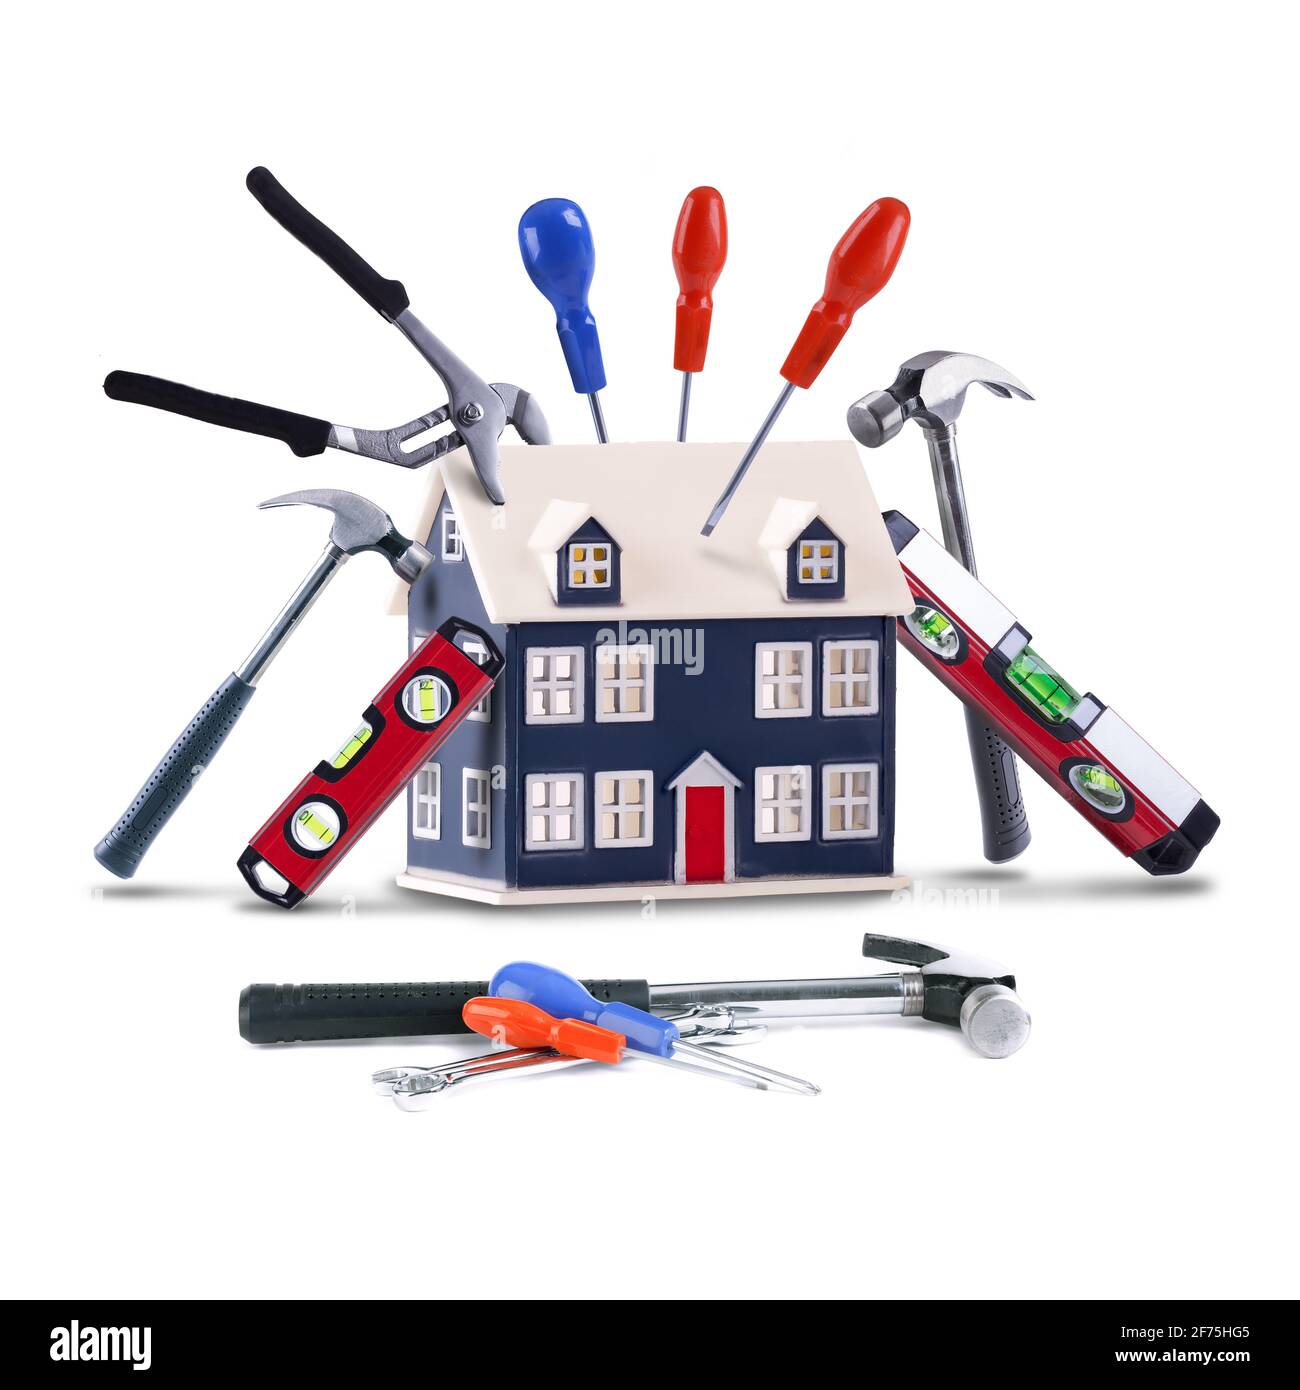 Home repair and maintenance concept with handyman tools on a toy house. Isolated on white background Stock Photo